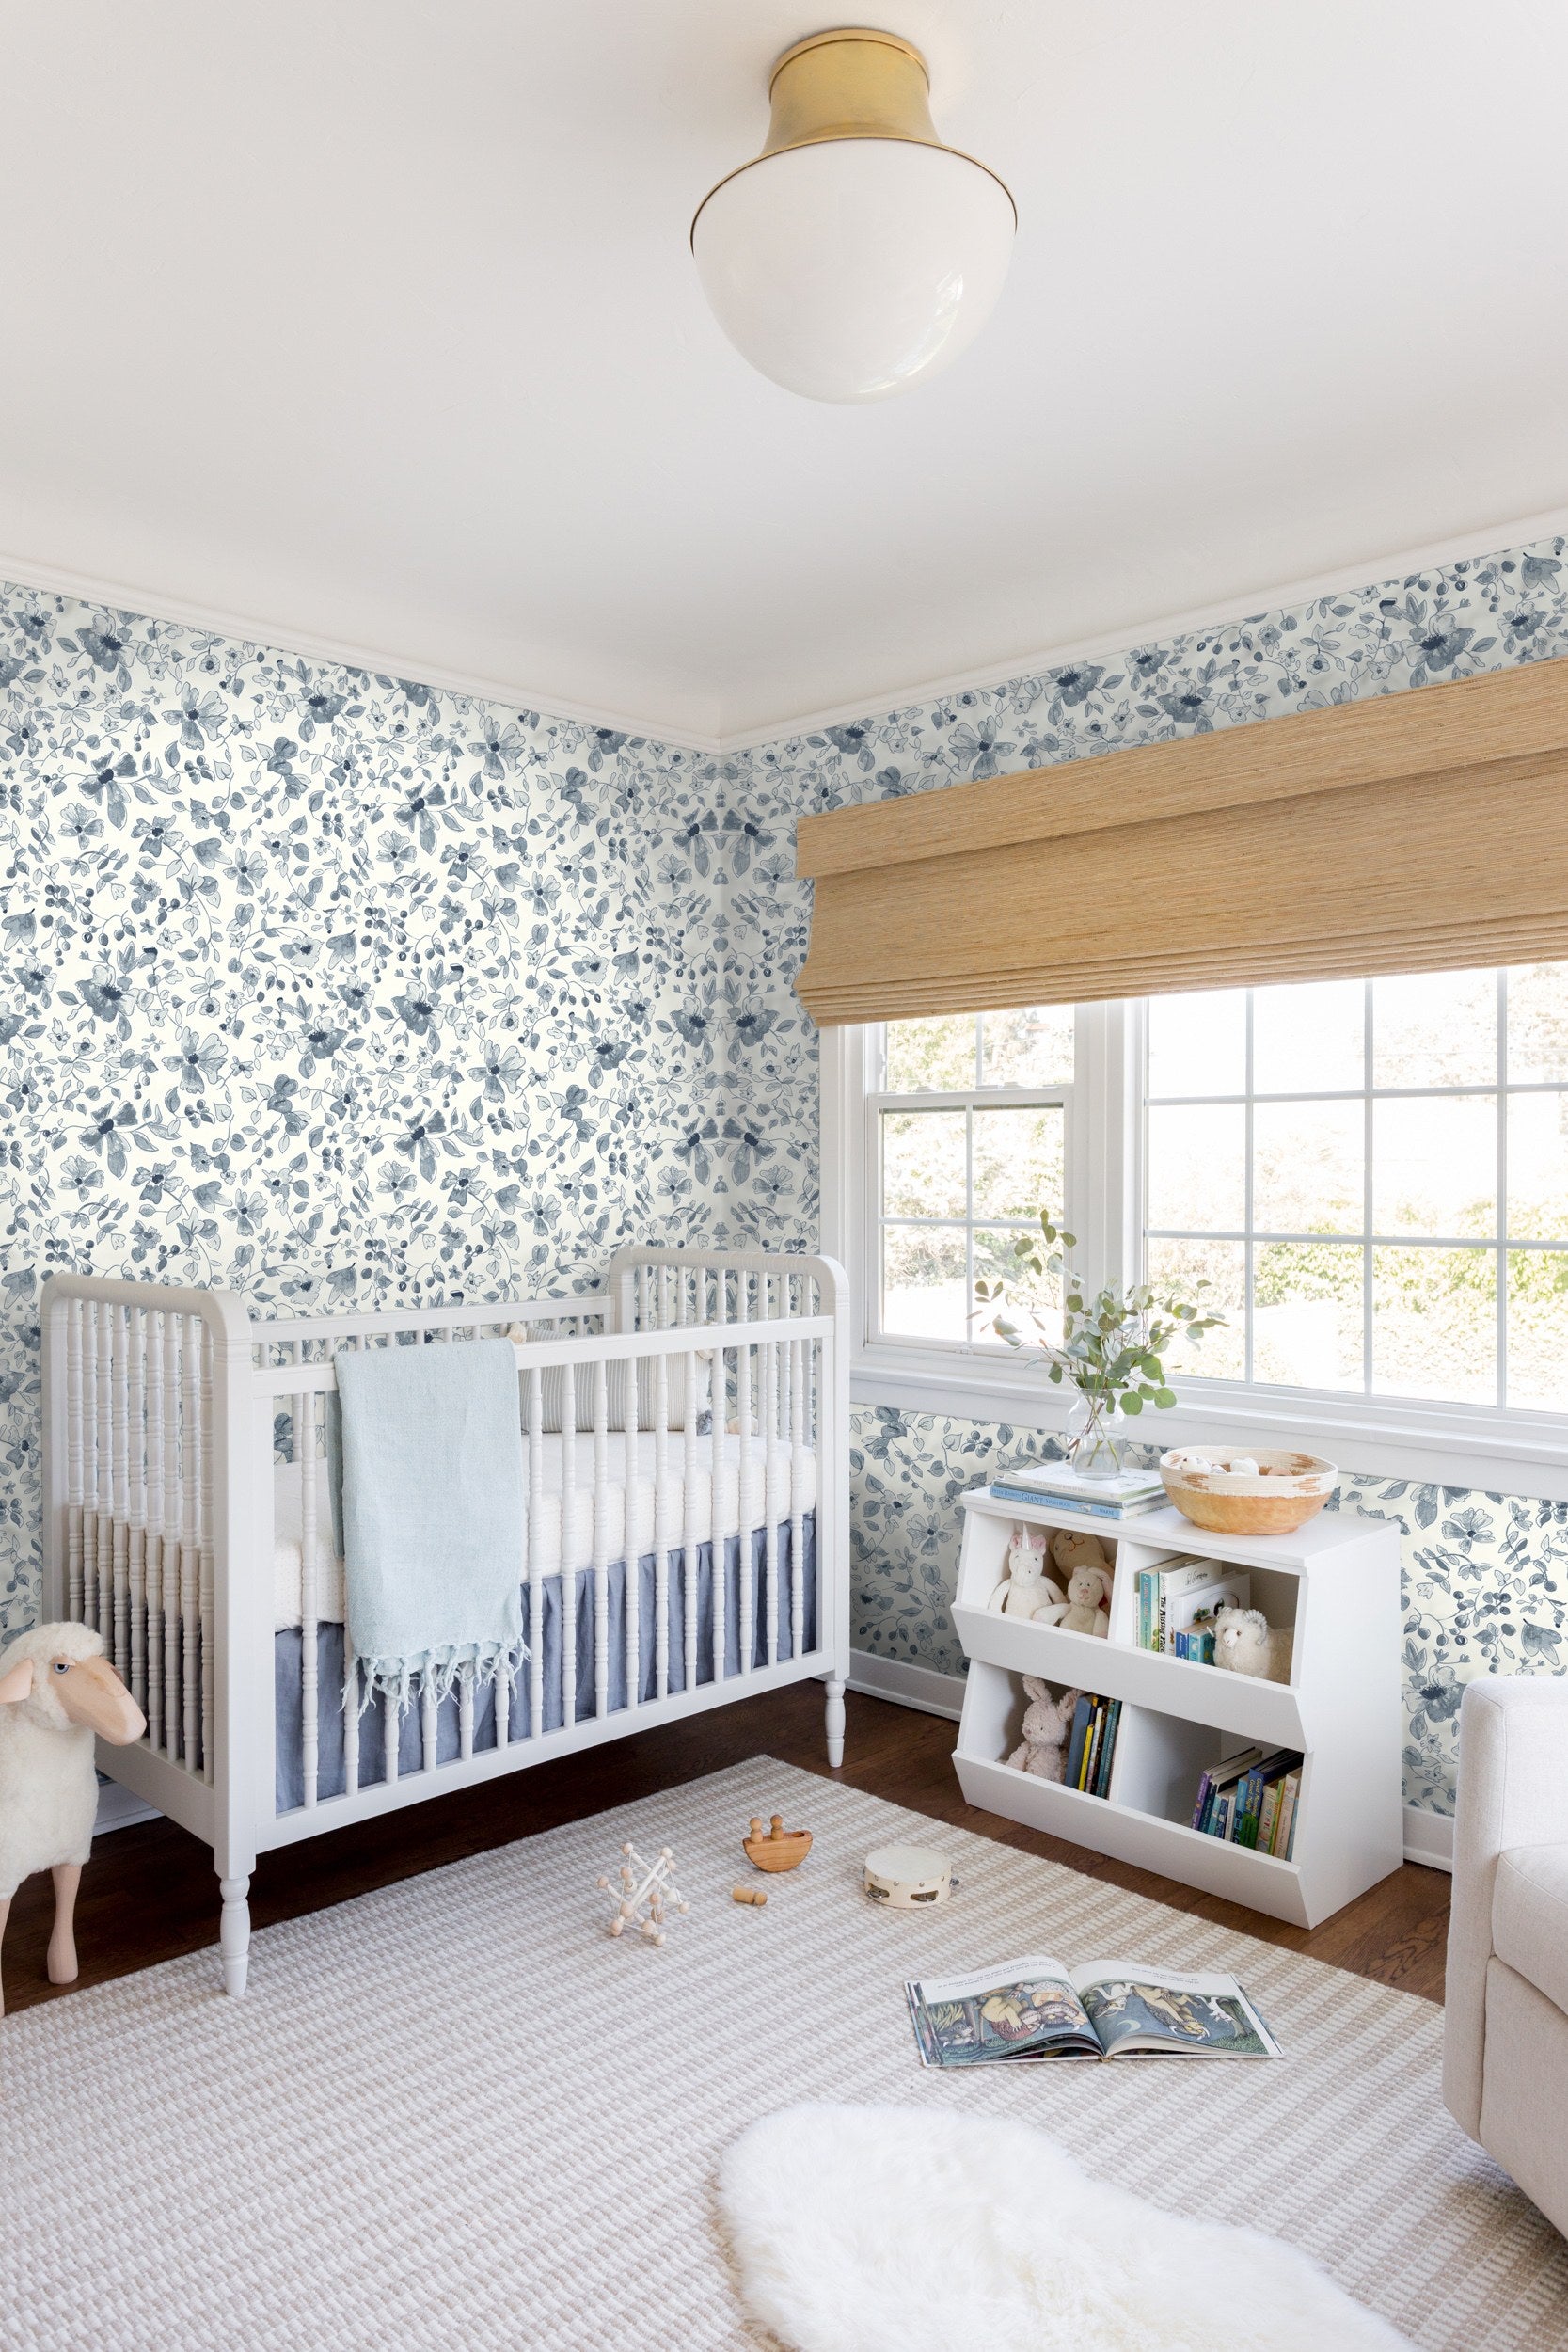 A blue floral wallpaper sets a sophisticated tone for this nursery, with a white crib, neutral striped rug and toys spread on the rug.